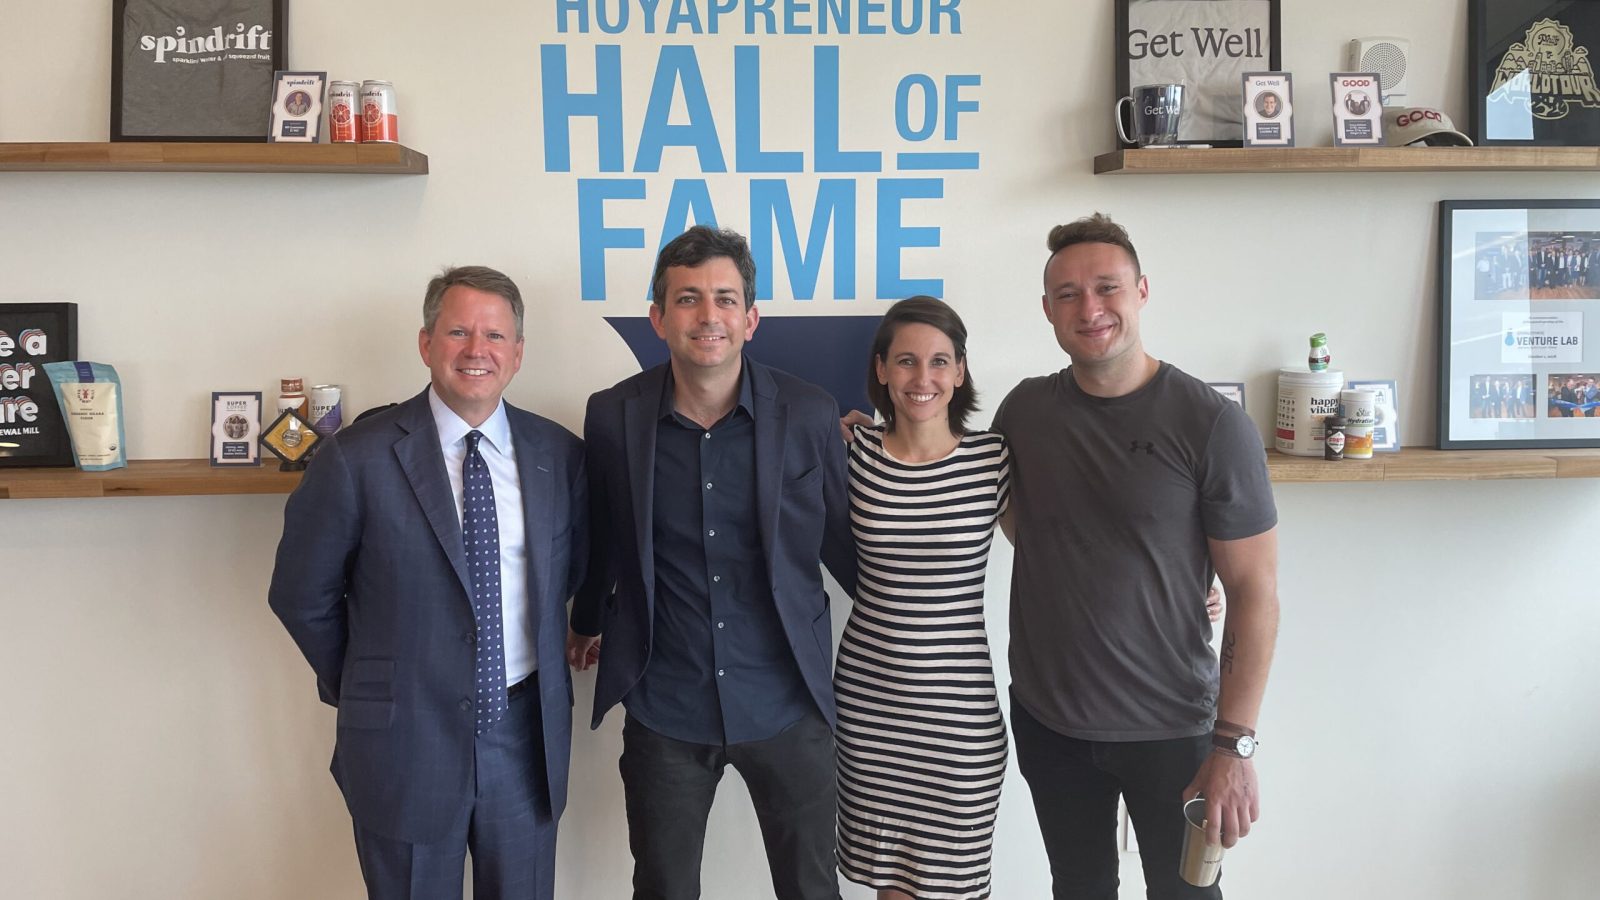 Four Georgetown community members stand in front of a sign painted on a wall that says &quot;Hoyapreneur Hall of Fame&quot;